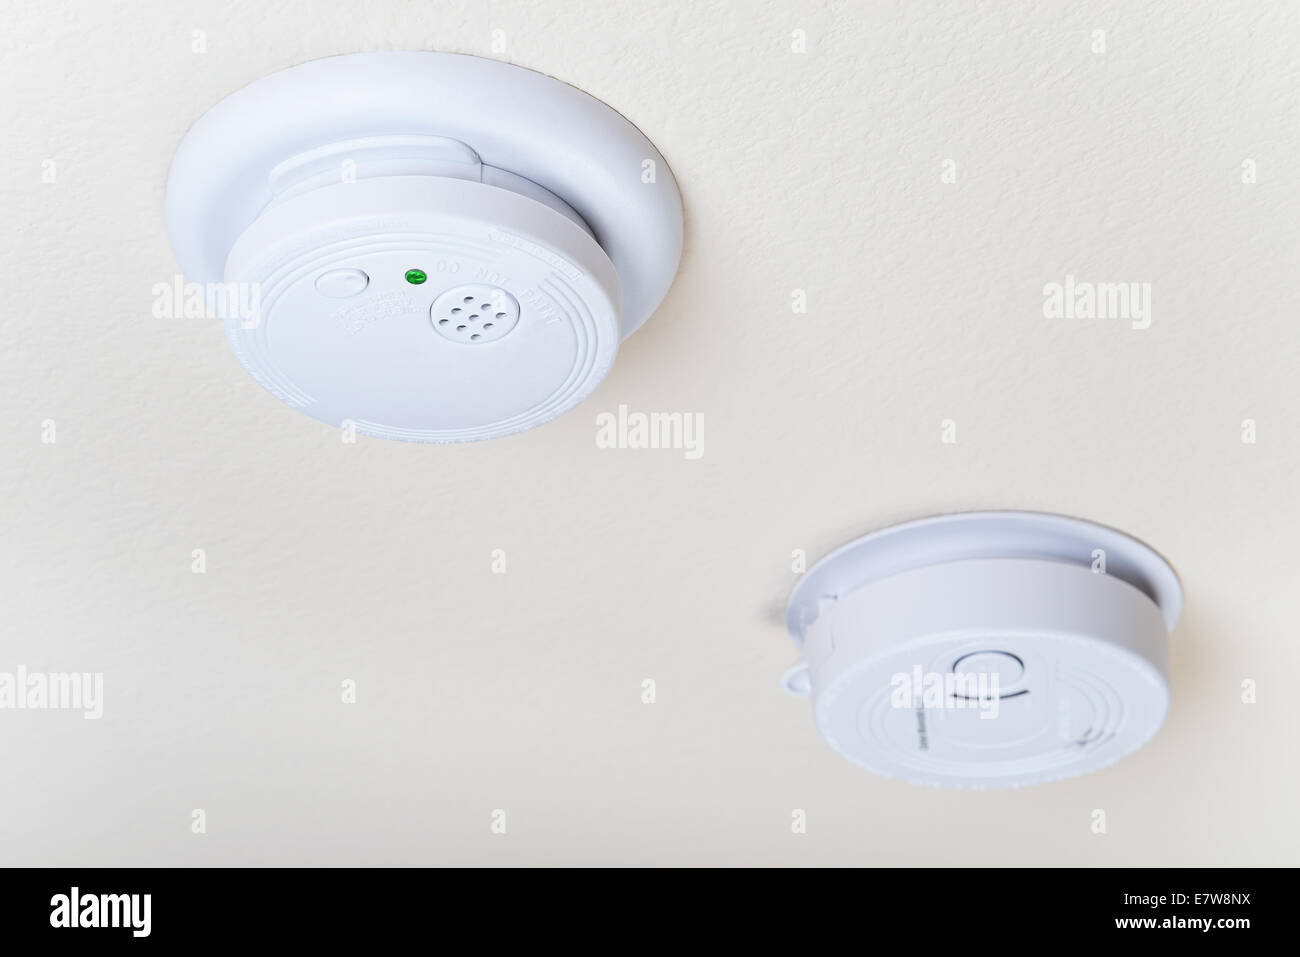 Smoke fire and a carbon monoxide alarm mounted on the ceiling Stock Photo